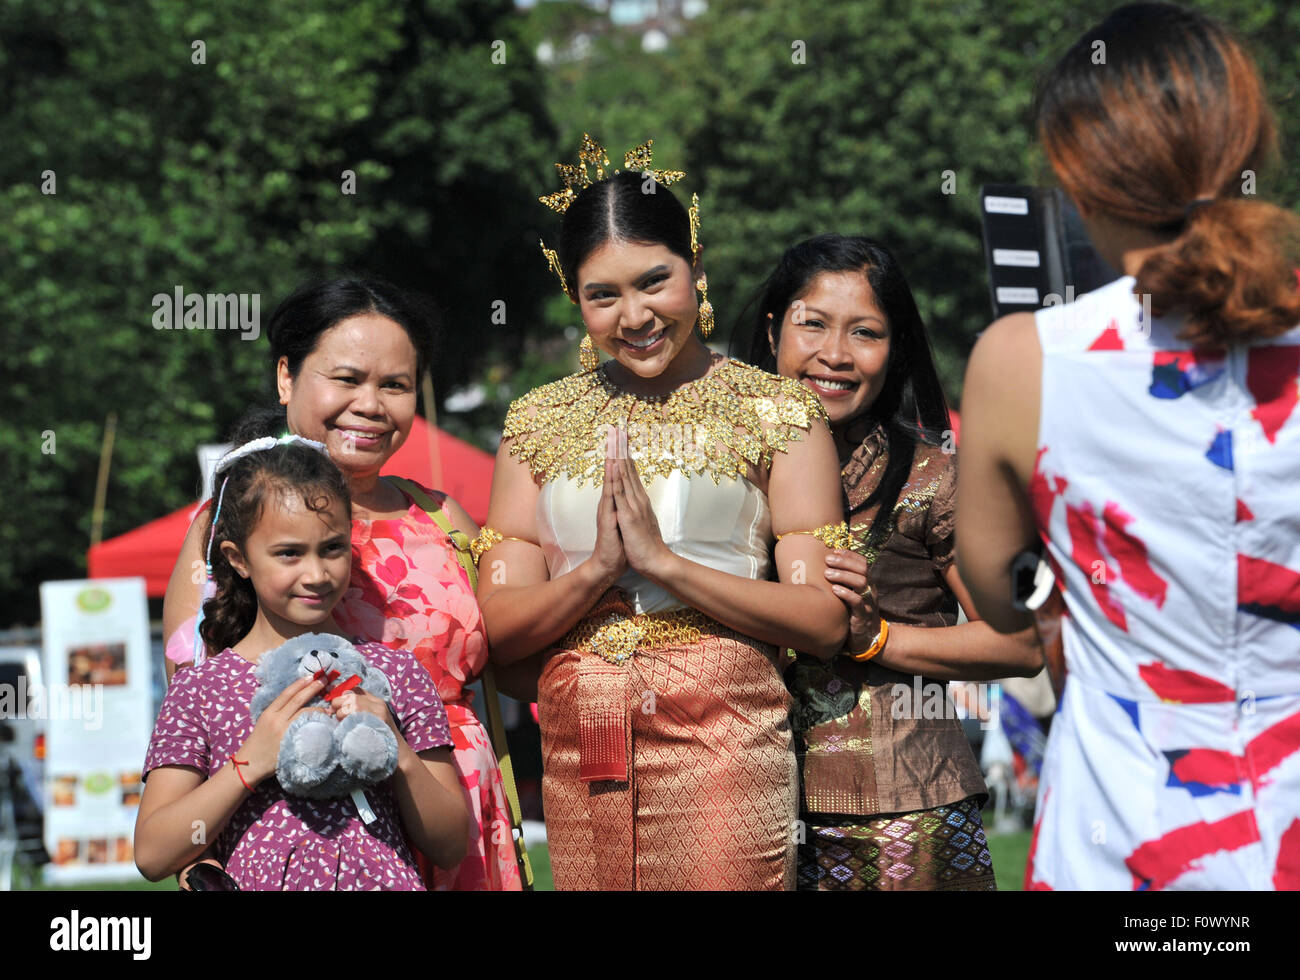 Brighton, UK. 22nd August, 2015. Visitors enjoy the blazing hot weather at the Brighton Thai Festival being held in Preston Park this weekend  Credit:  Simon Dack/Alamy Live News Stock Photo